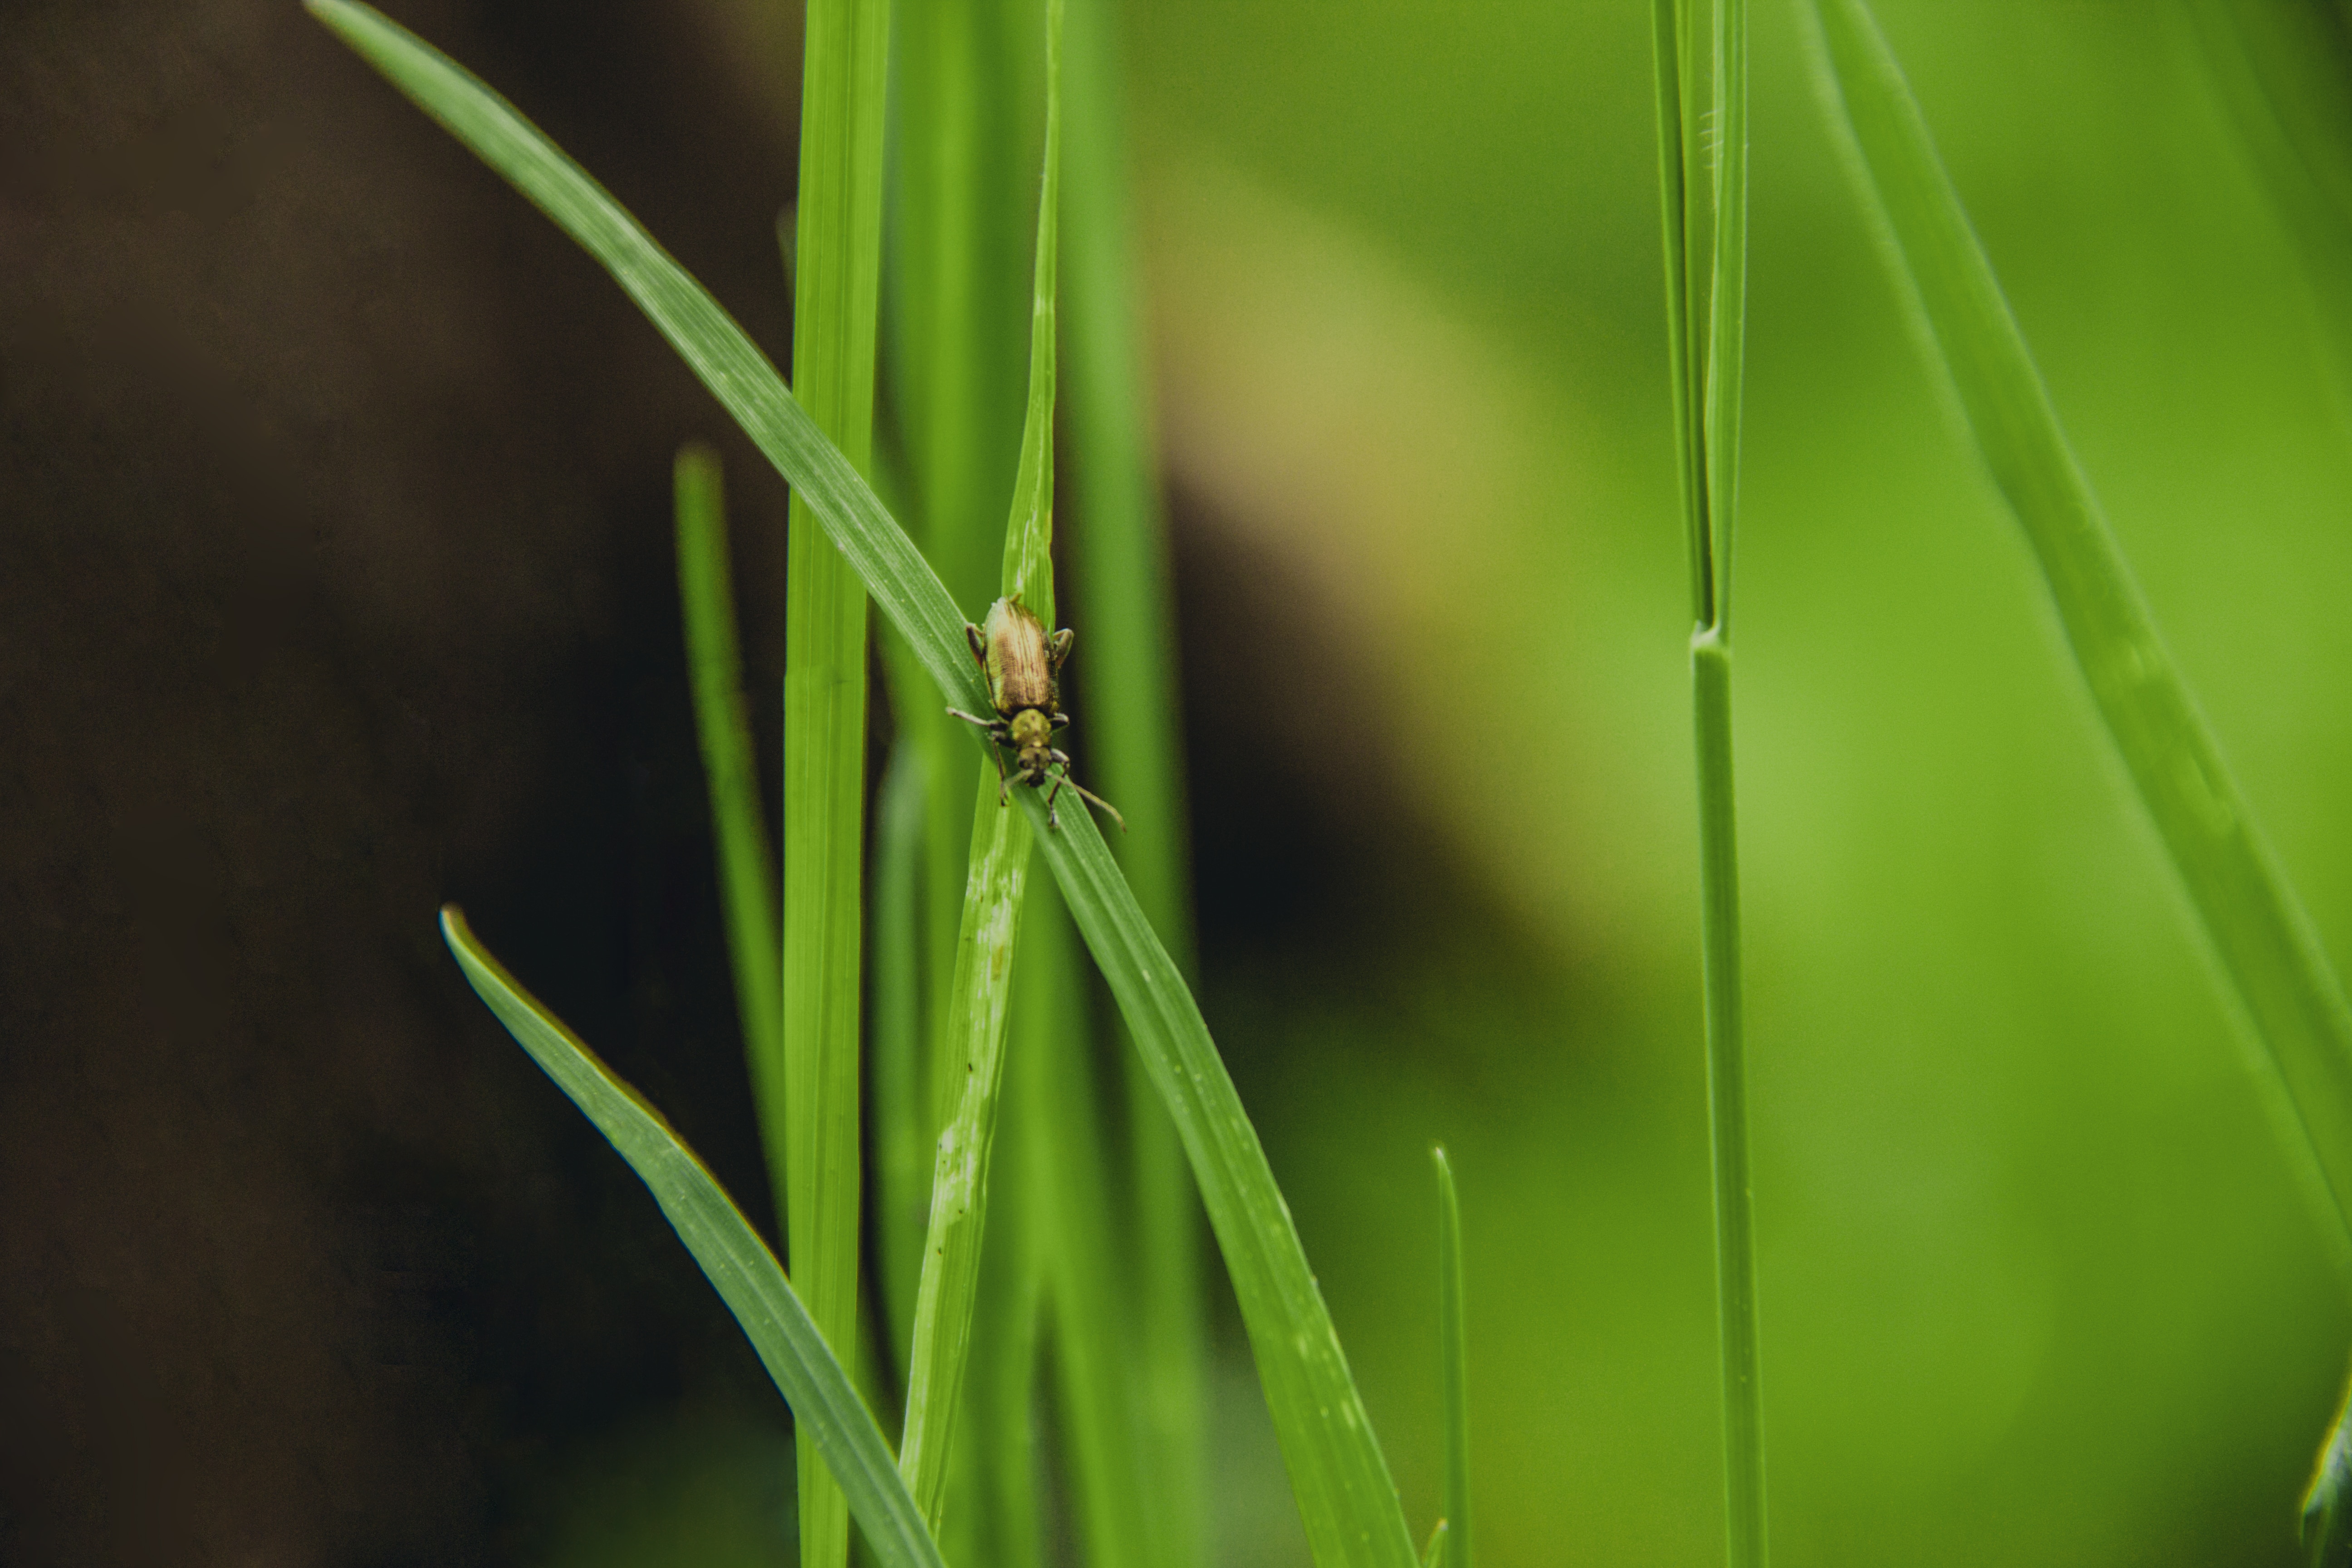 brown beetle on top of a green grass blade